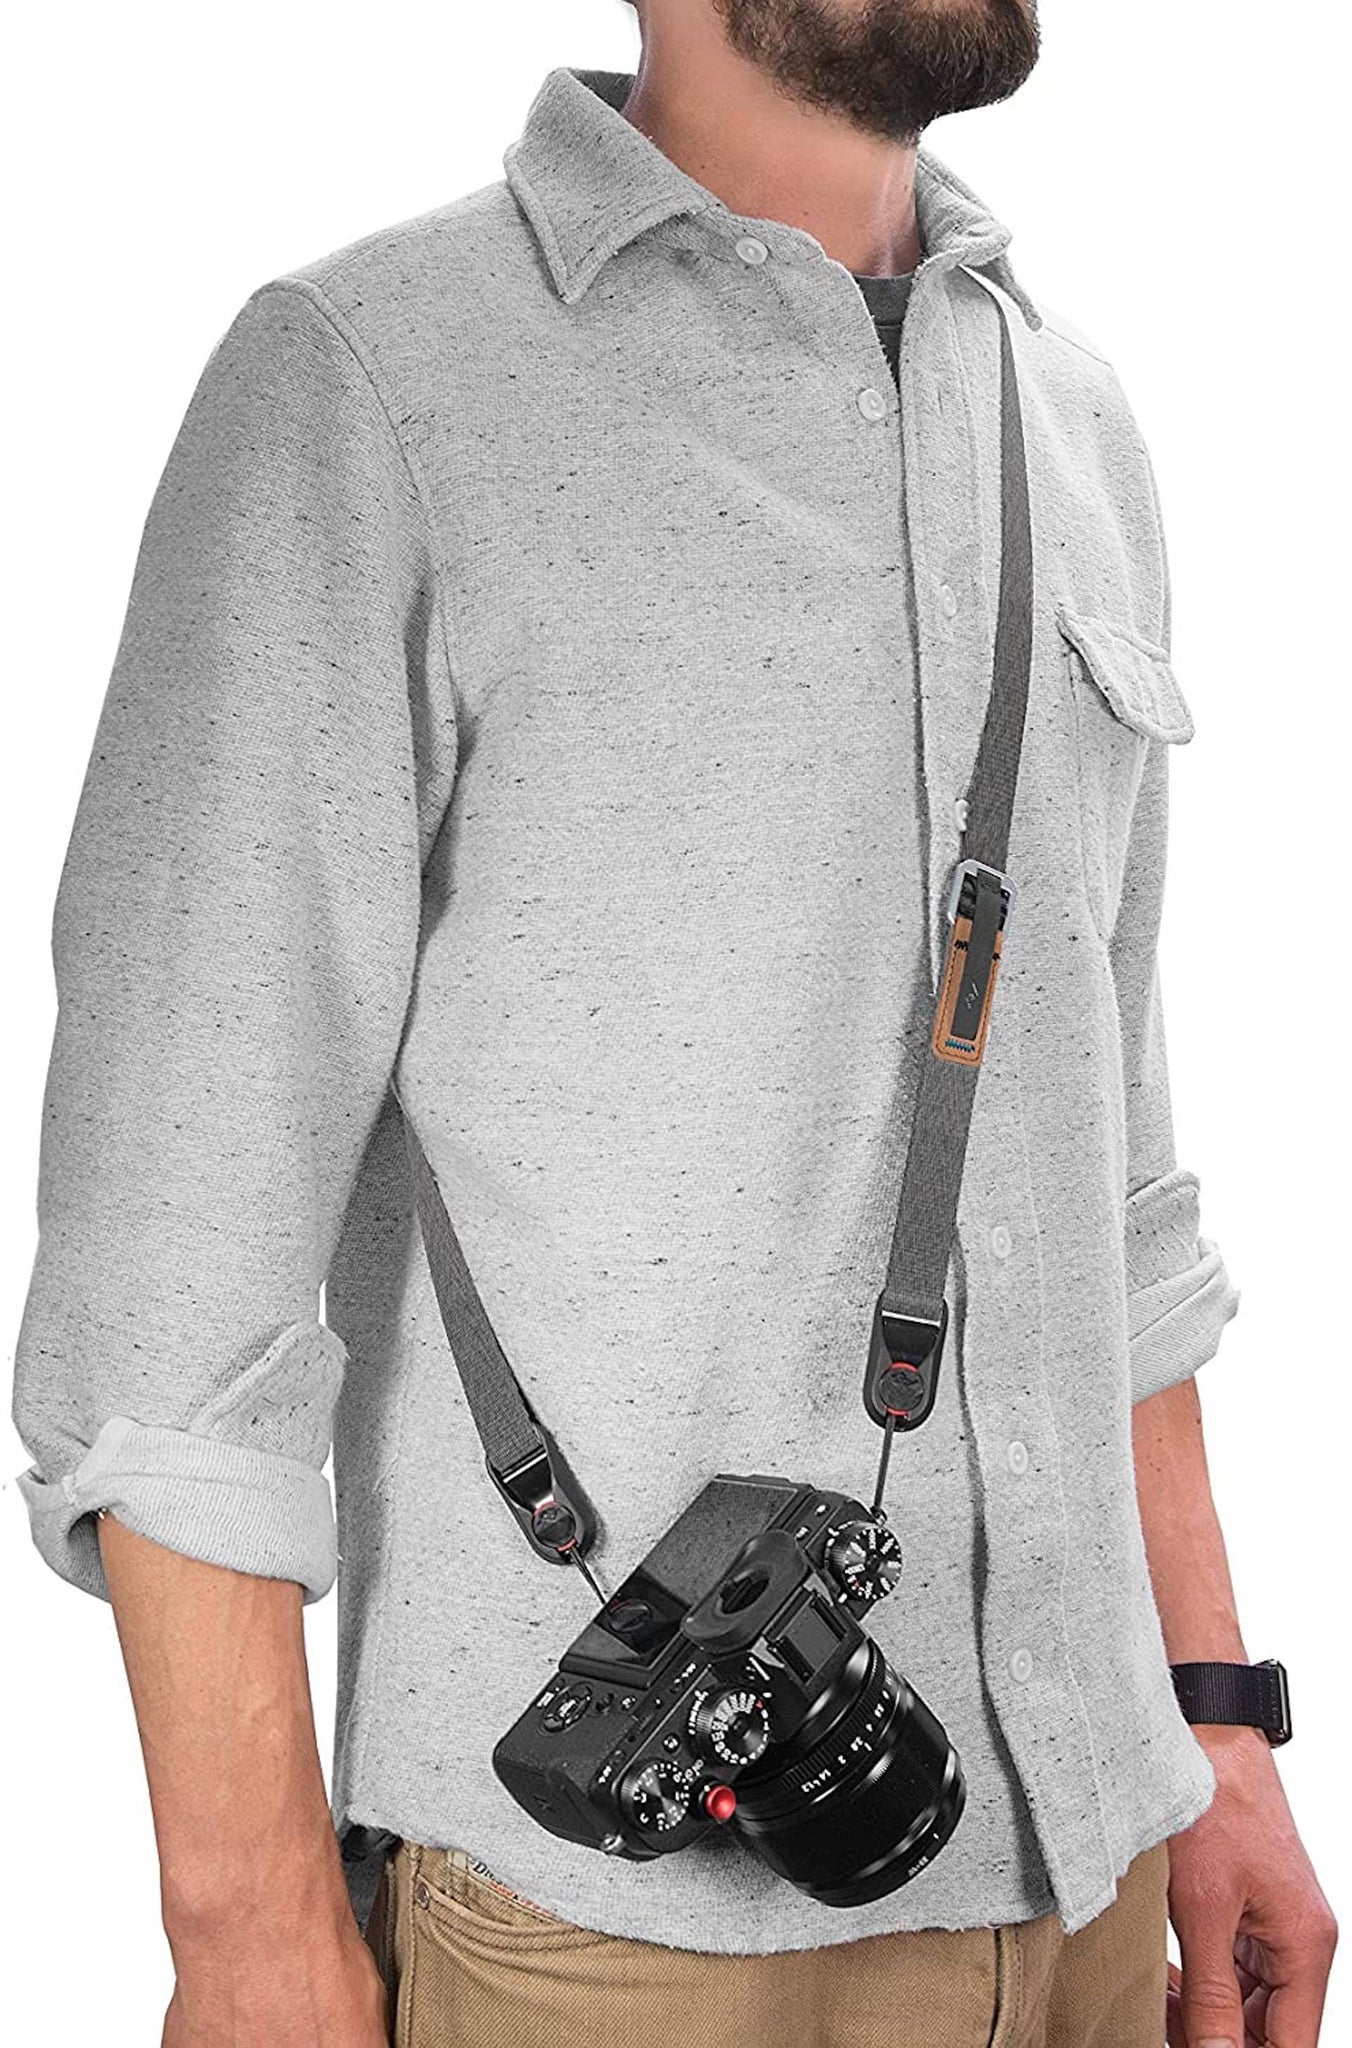 Best Photo Gifts for Photographers - Ideas Photographer Lovers - Peak Design Camera Strap